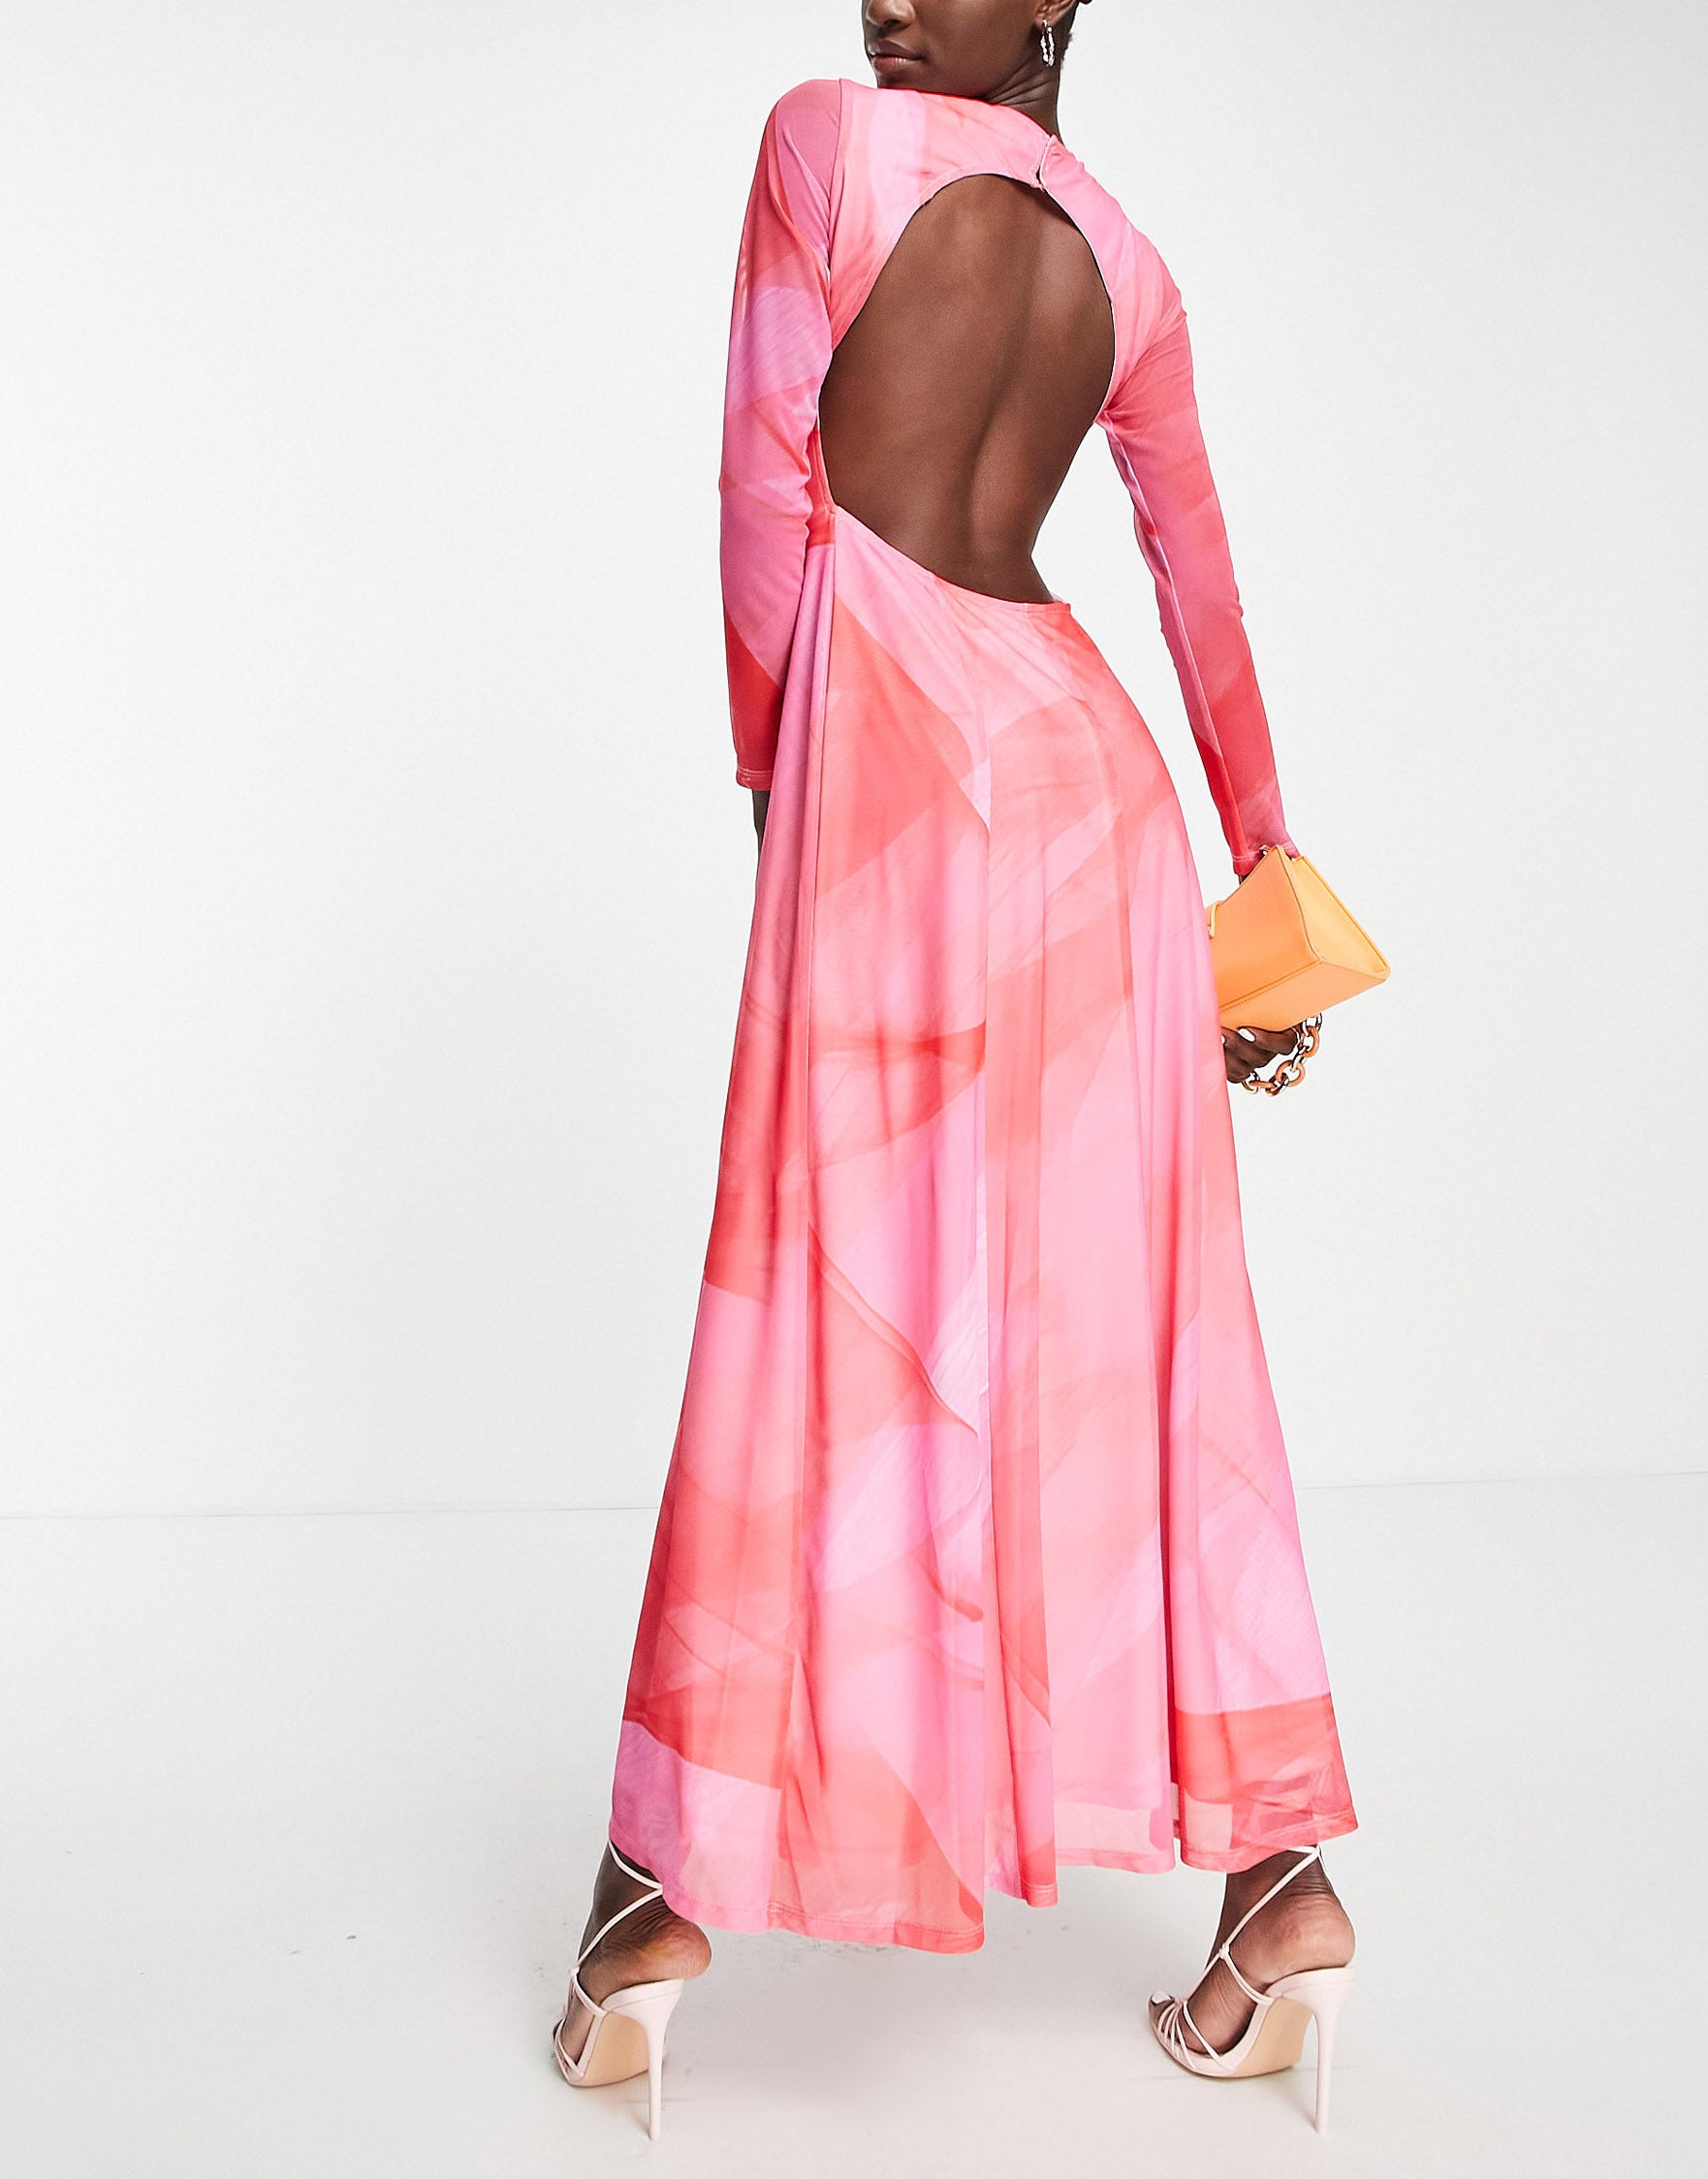 Topshop long maxi dress in pink and red watercolour – ASOS Sample Sale